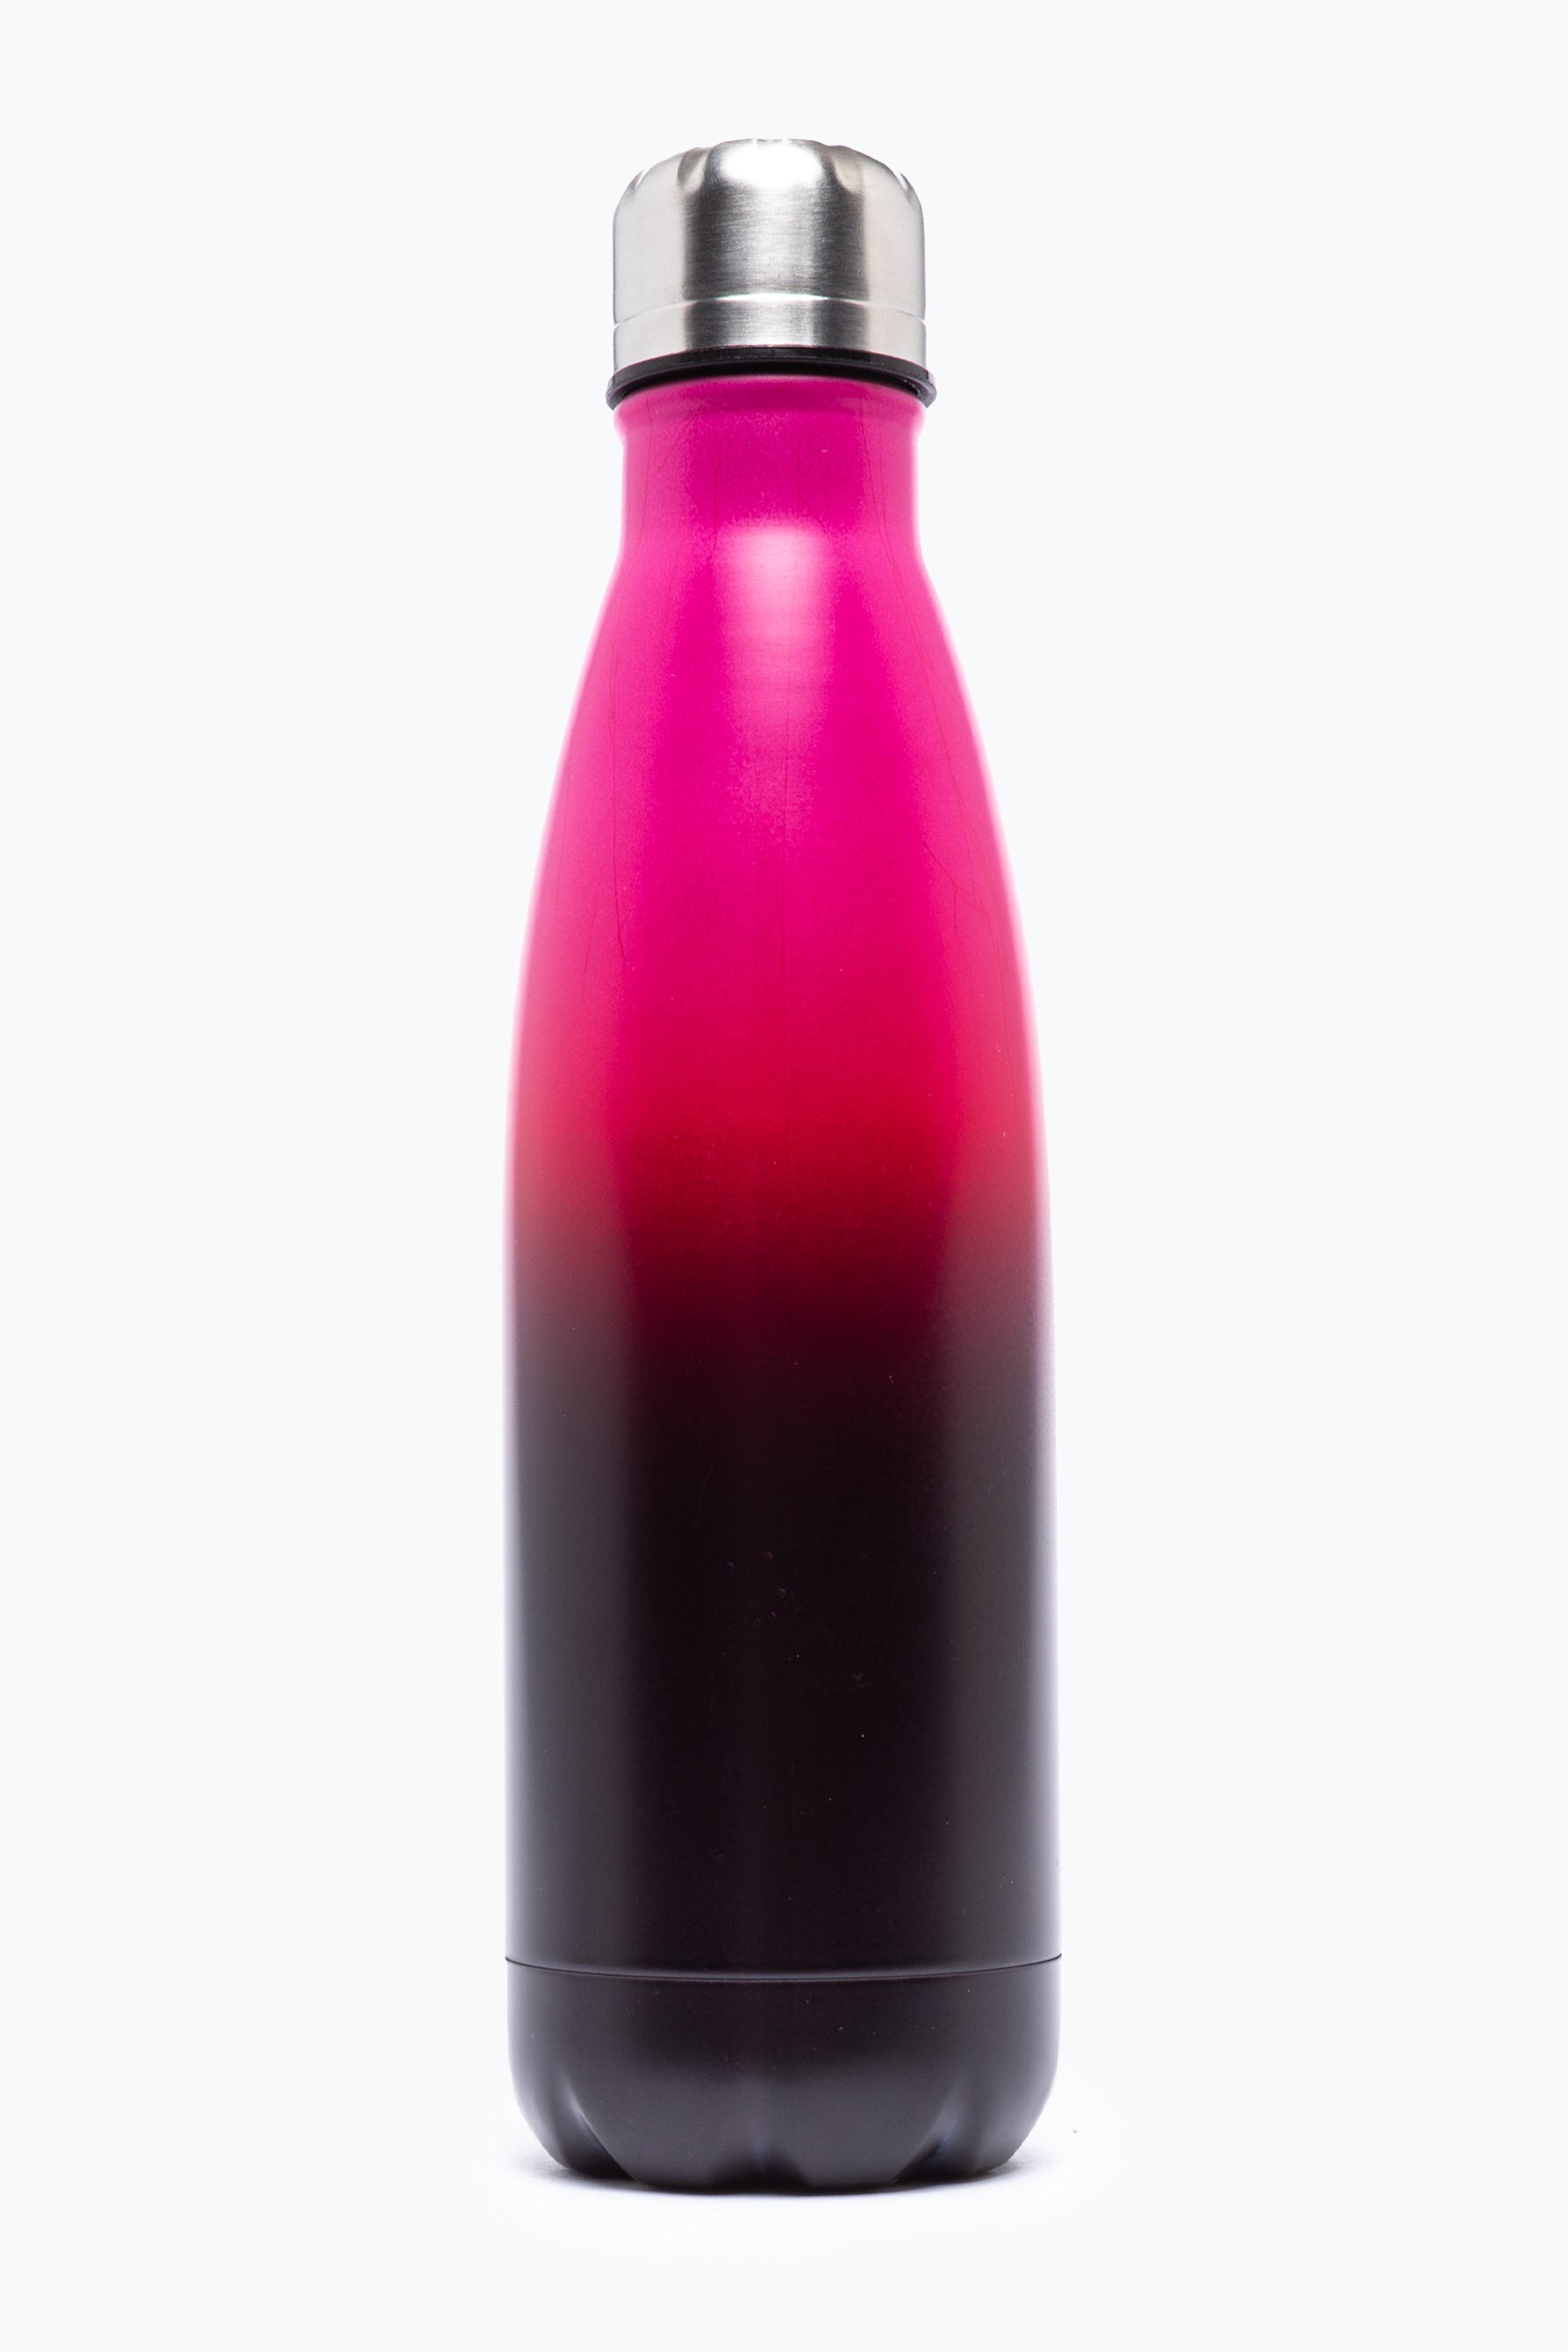 Alternate View 1 of HYPE UNISEX PINK BLACK FADE CREST WATER BOTTLE